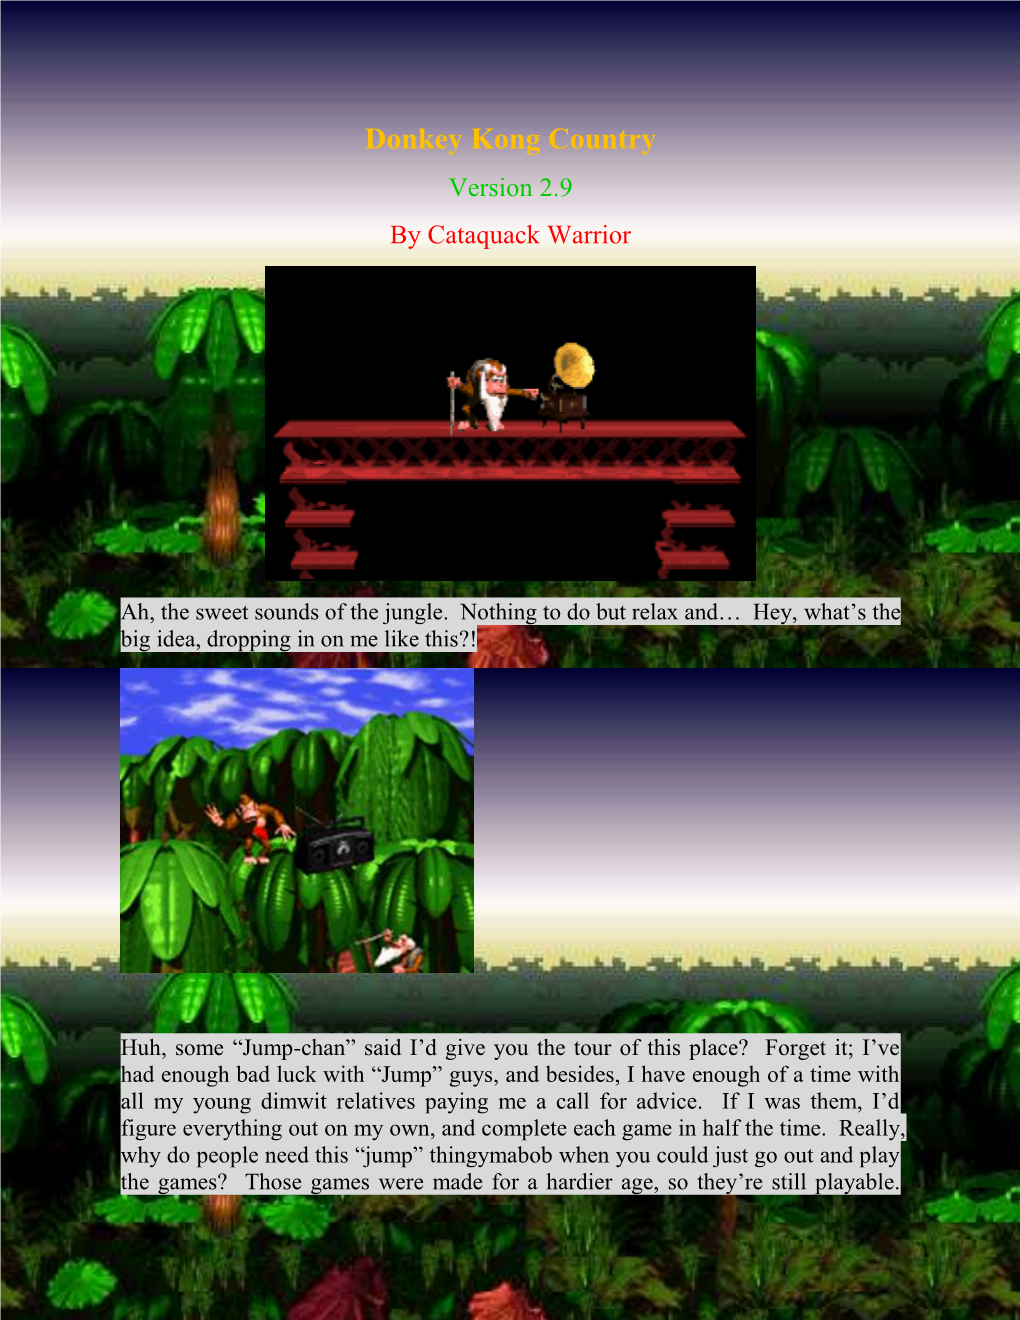 Donkey Kong Country Version 2.9 by Cataquack Warrior